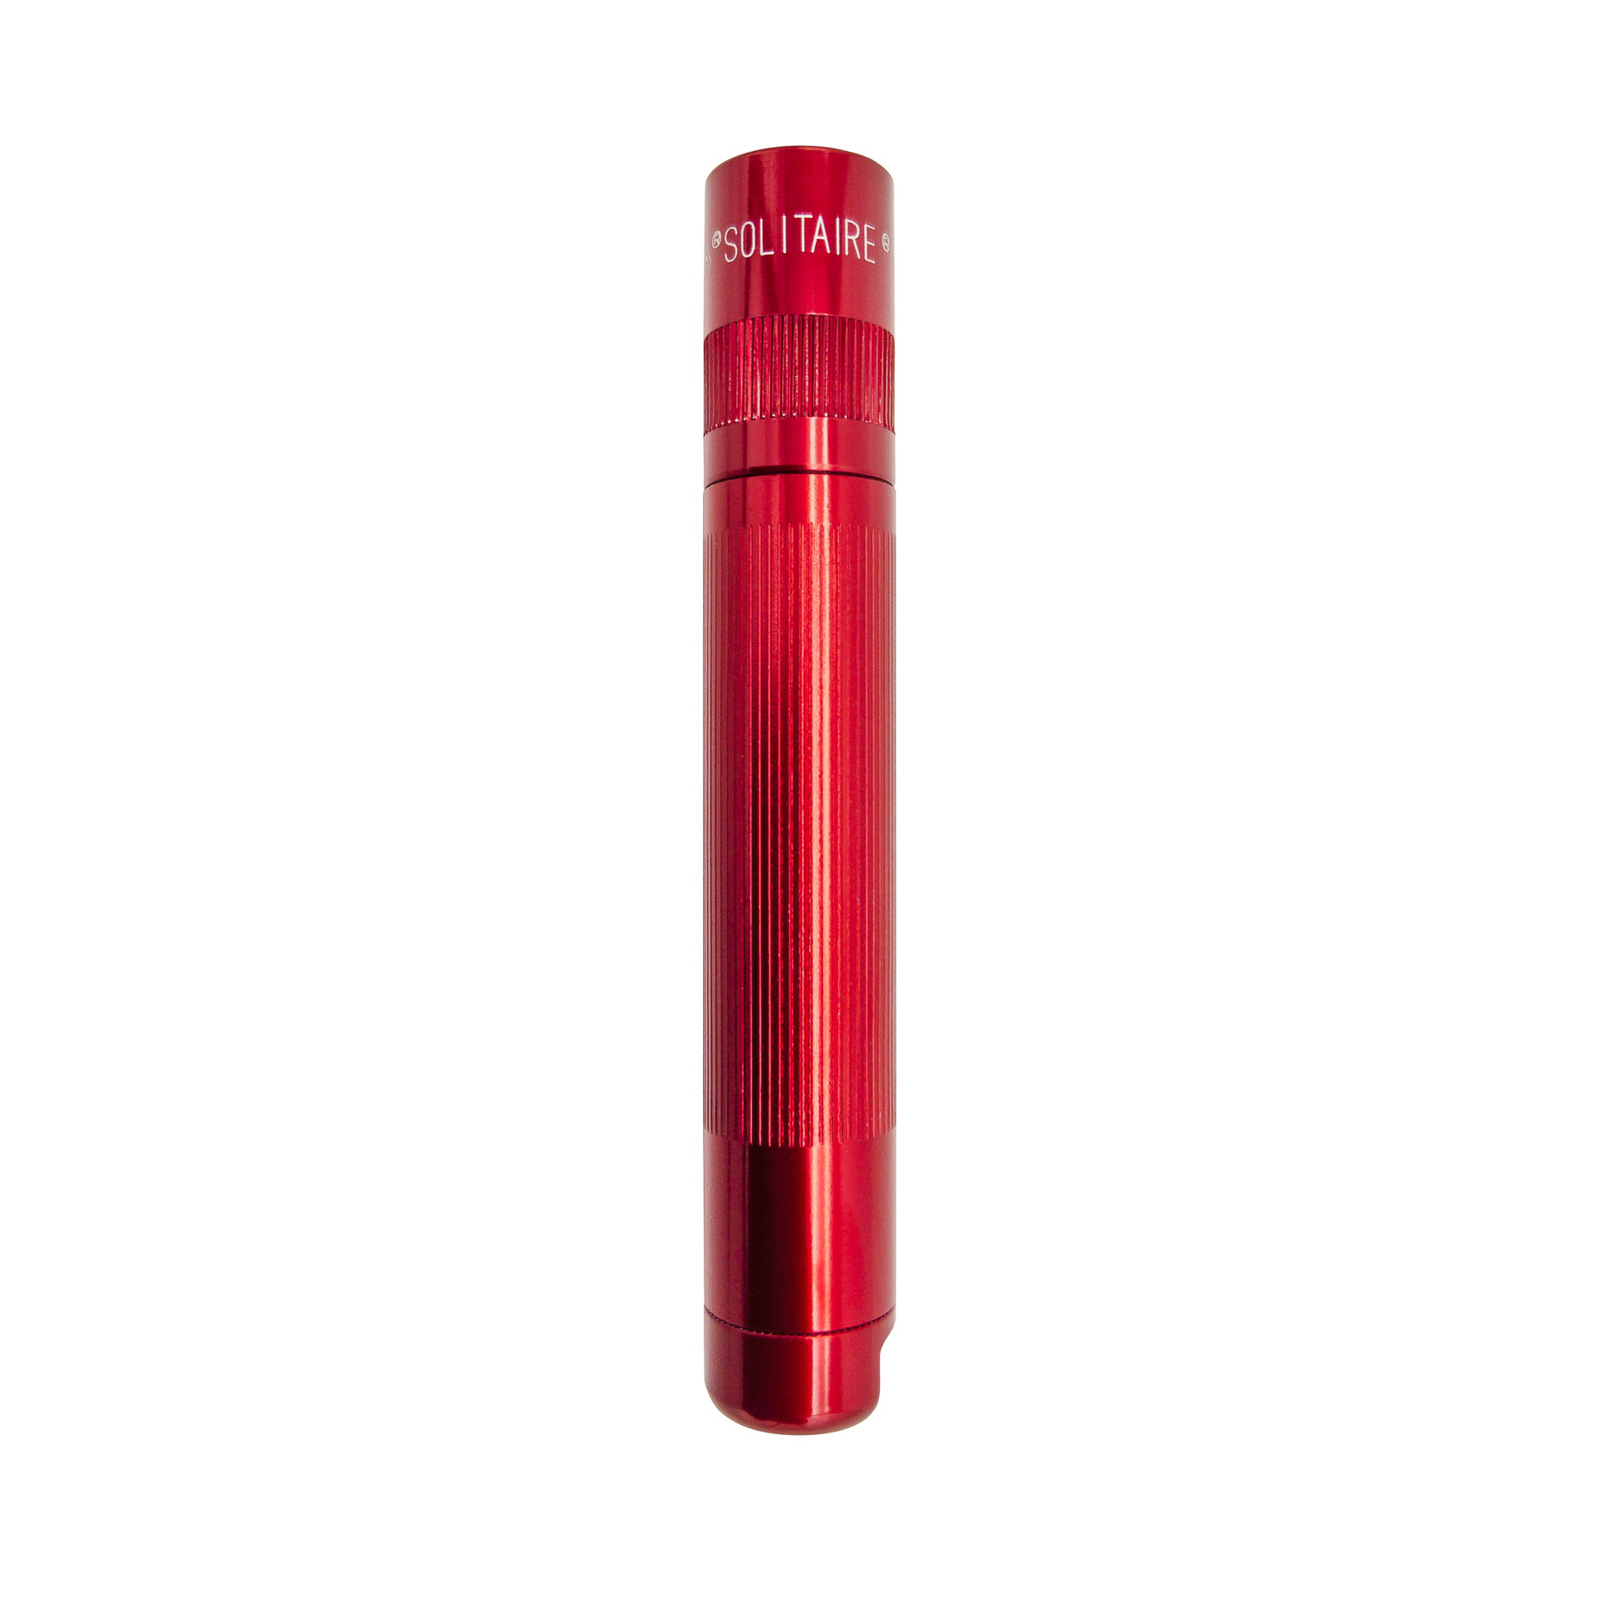 Maglite φακός Xenon Solitaire 1-Cell AAA, κουτί, κόκκινο